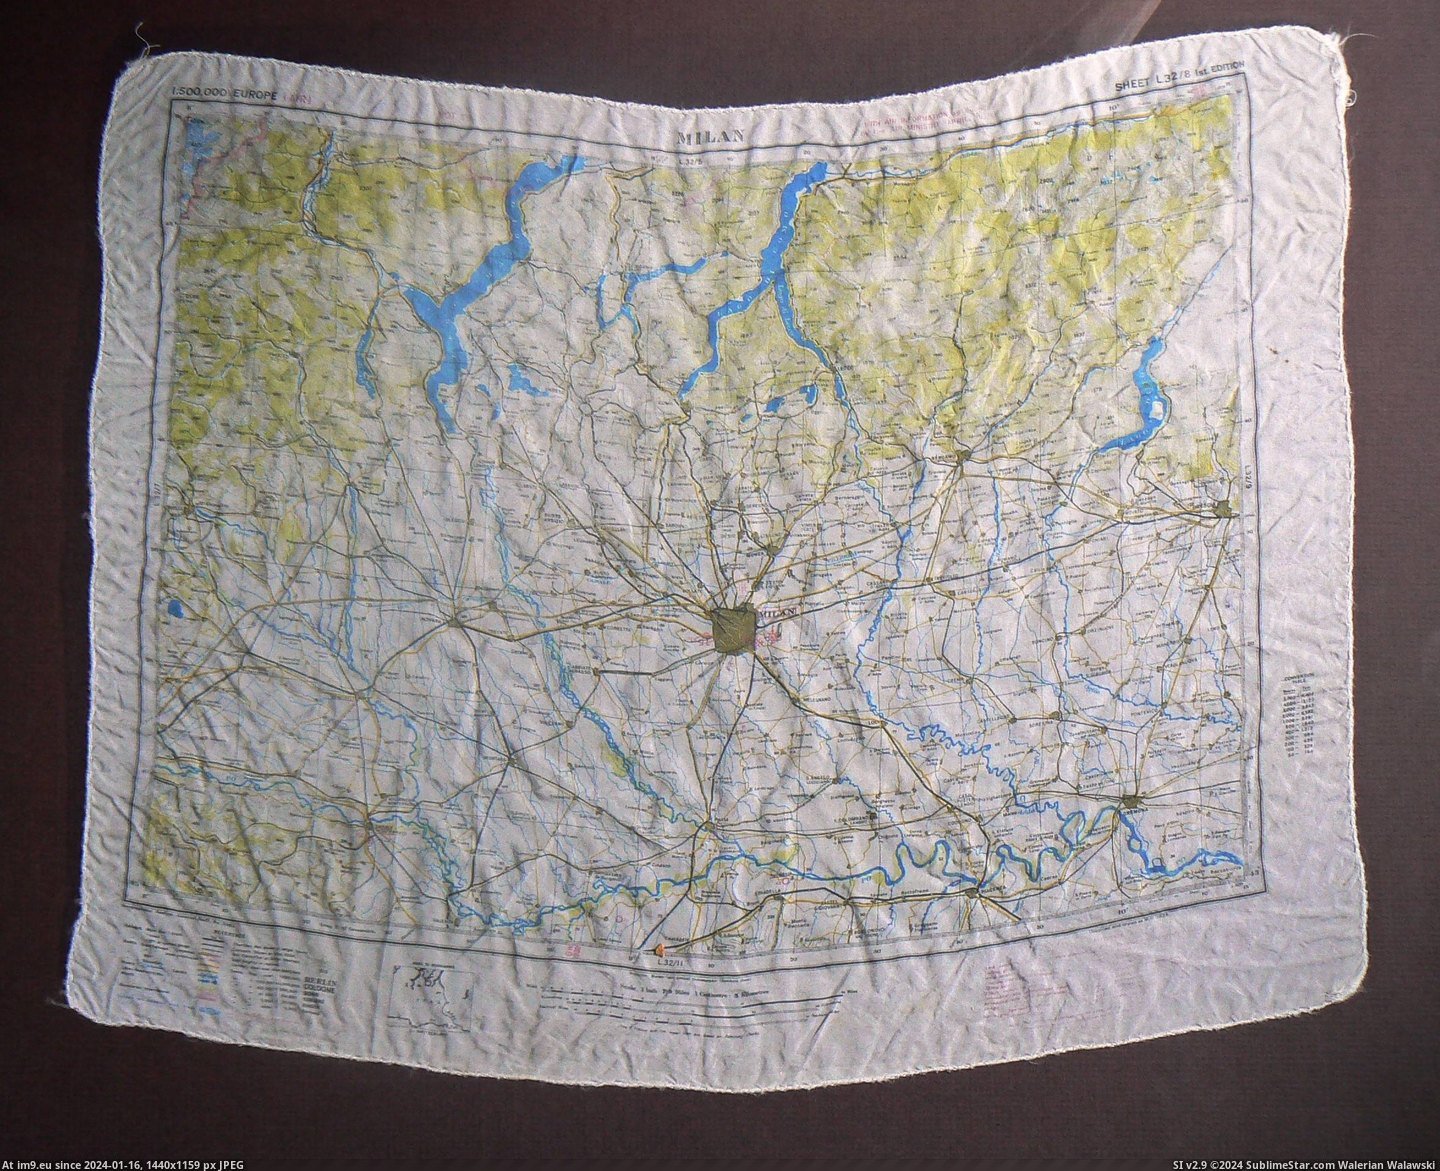 #Map #Area #Wwii #Silk #Escape #Milan [Mapporn] A WWII silk 'escape map' of the Milan area [2,355 x 1,908] Pic. (Bild von album My r/MAPS favs))